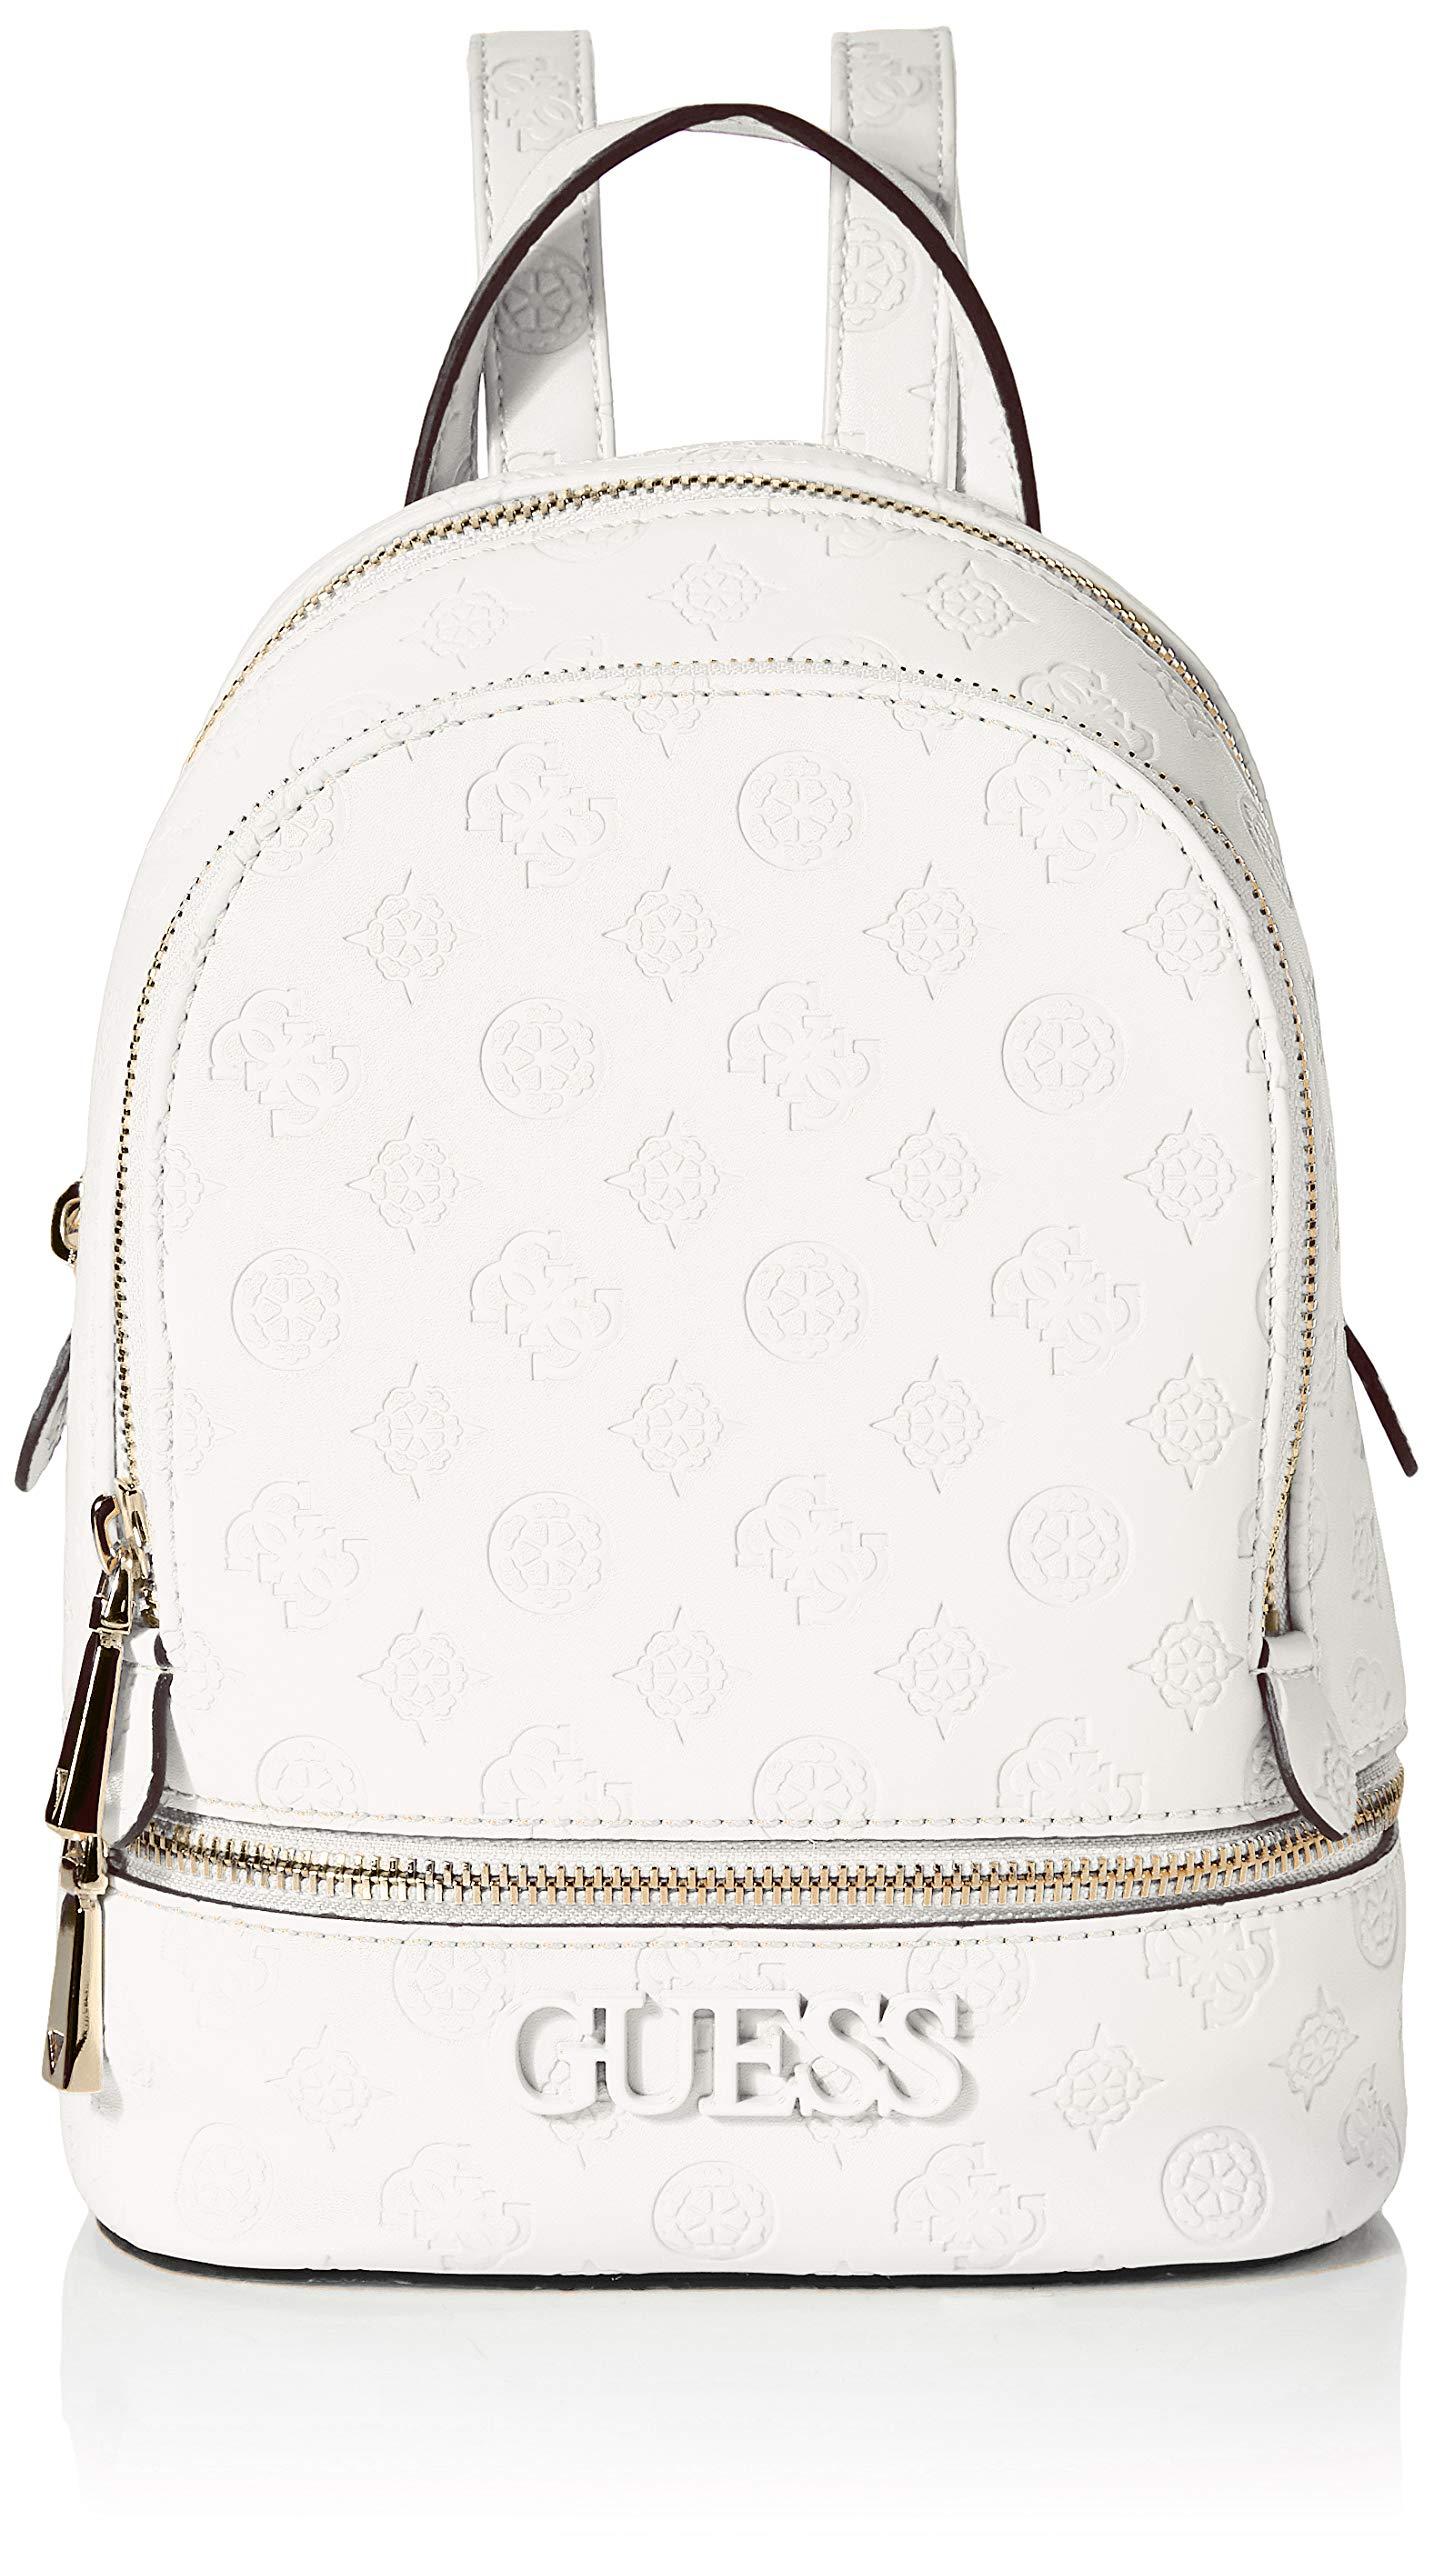 Guess Backpack in Ivory (White) - Lyst